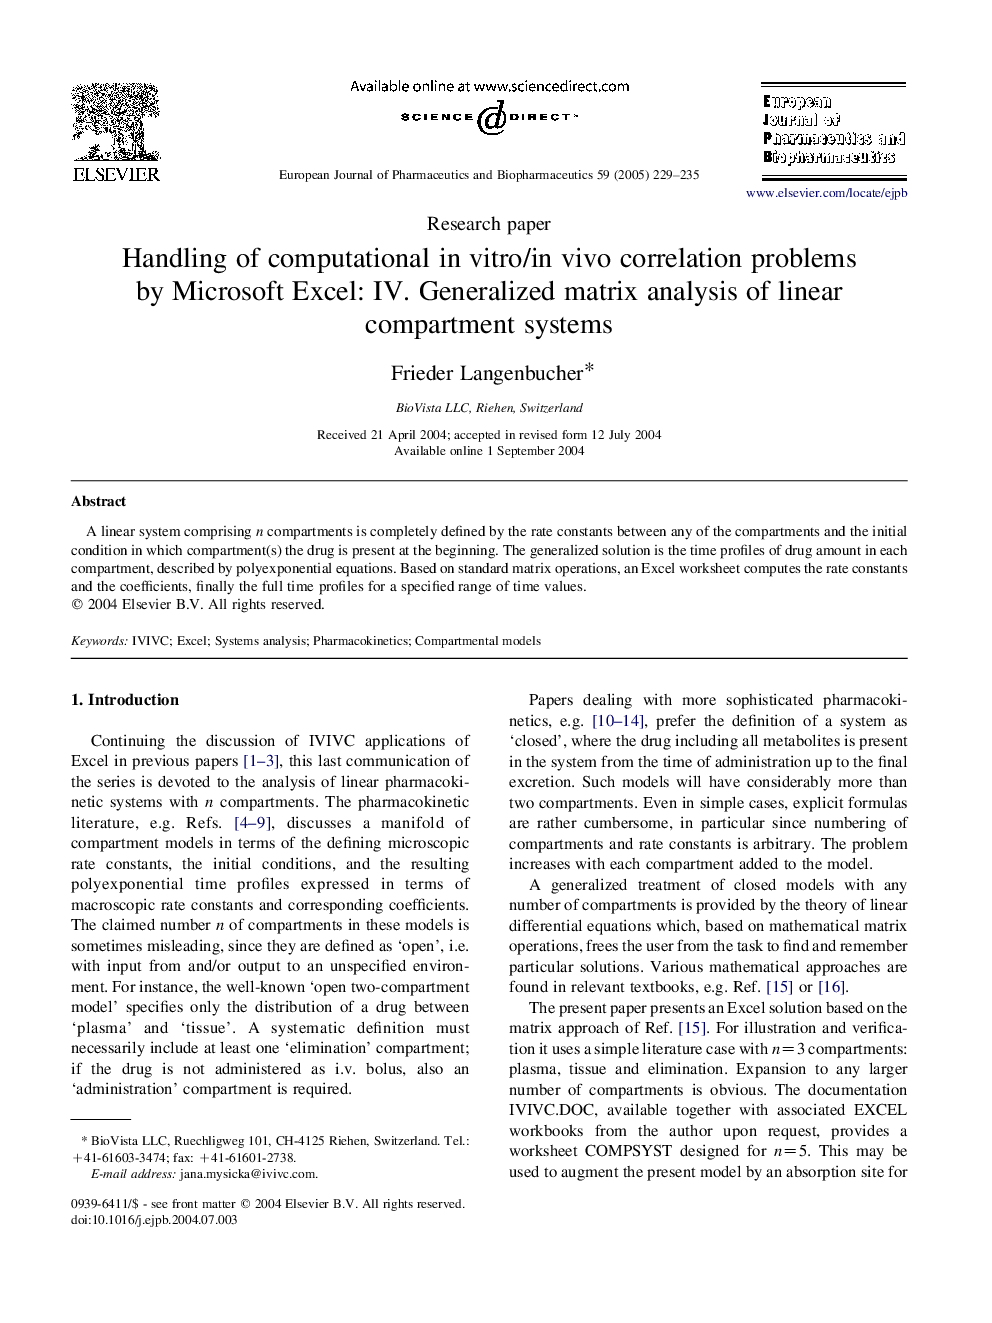 Handling of computational in vitro/in vivo correlation problems by Microsoft Excel: IV. Generalized matrix analysis of linear compartment systems